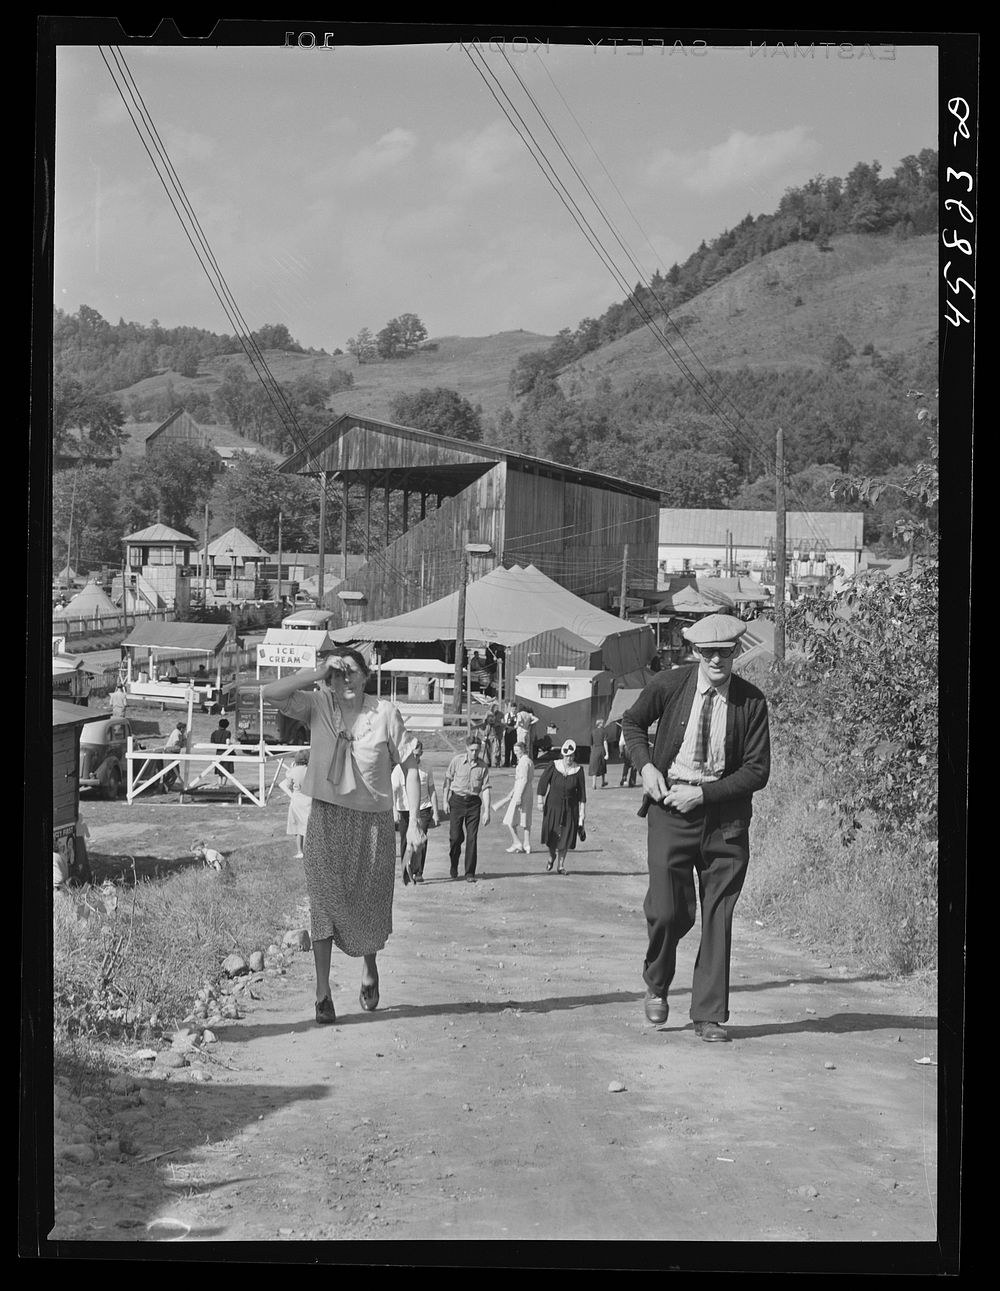 At the World's Fair at Tunbridge, Vermont. Sourced from the Library of Congress.